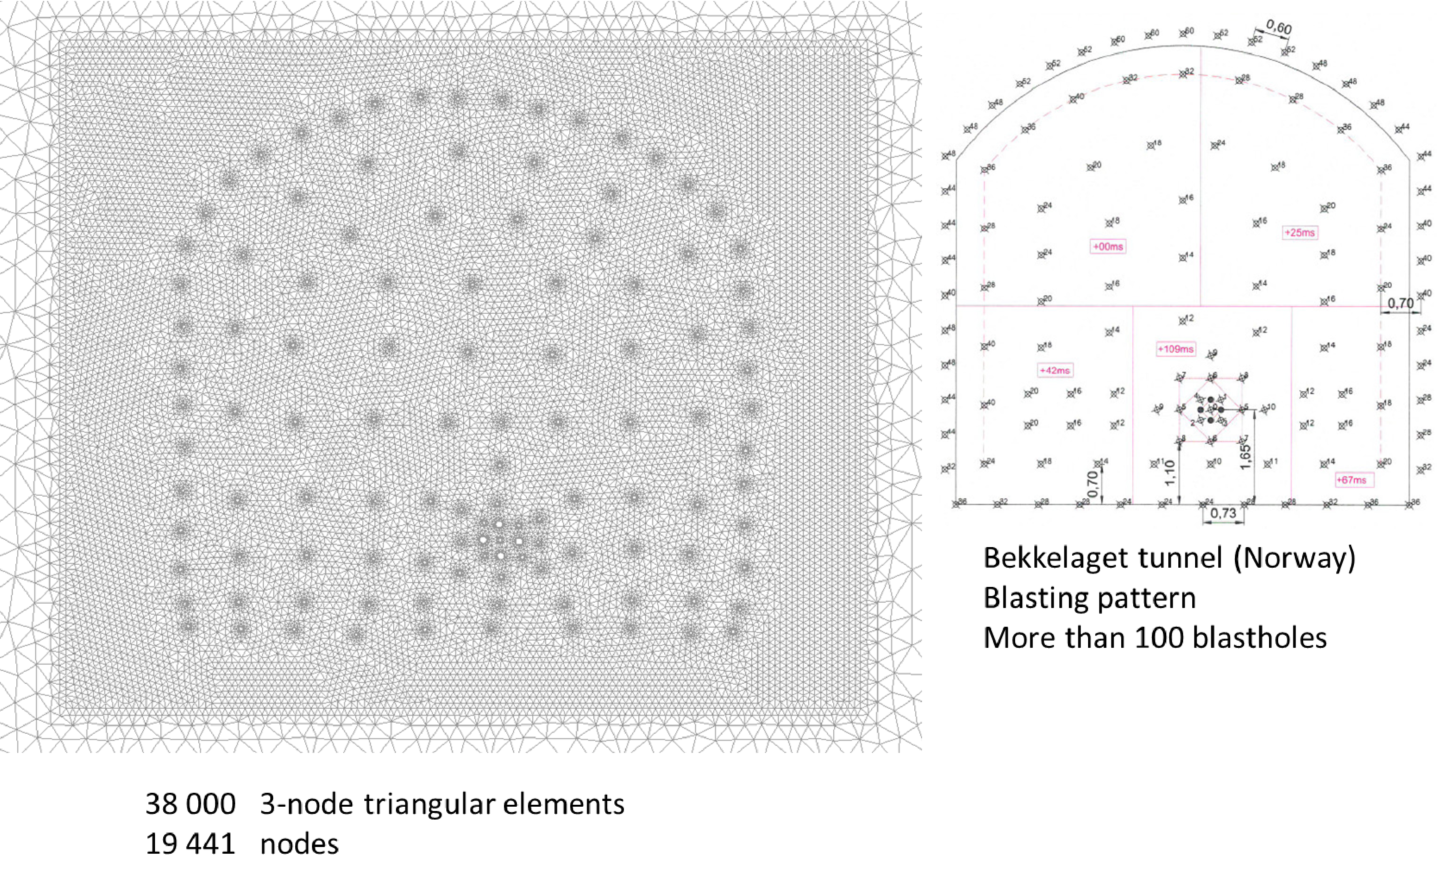 Distribution of blast holes at the front of the Bekkelaget tunnel (Norway) and finite element method for FEM-DEM simulation of the cracking pattern